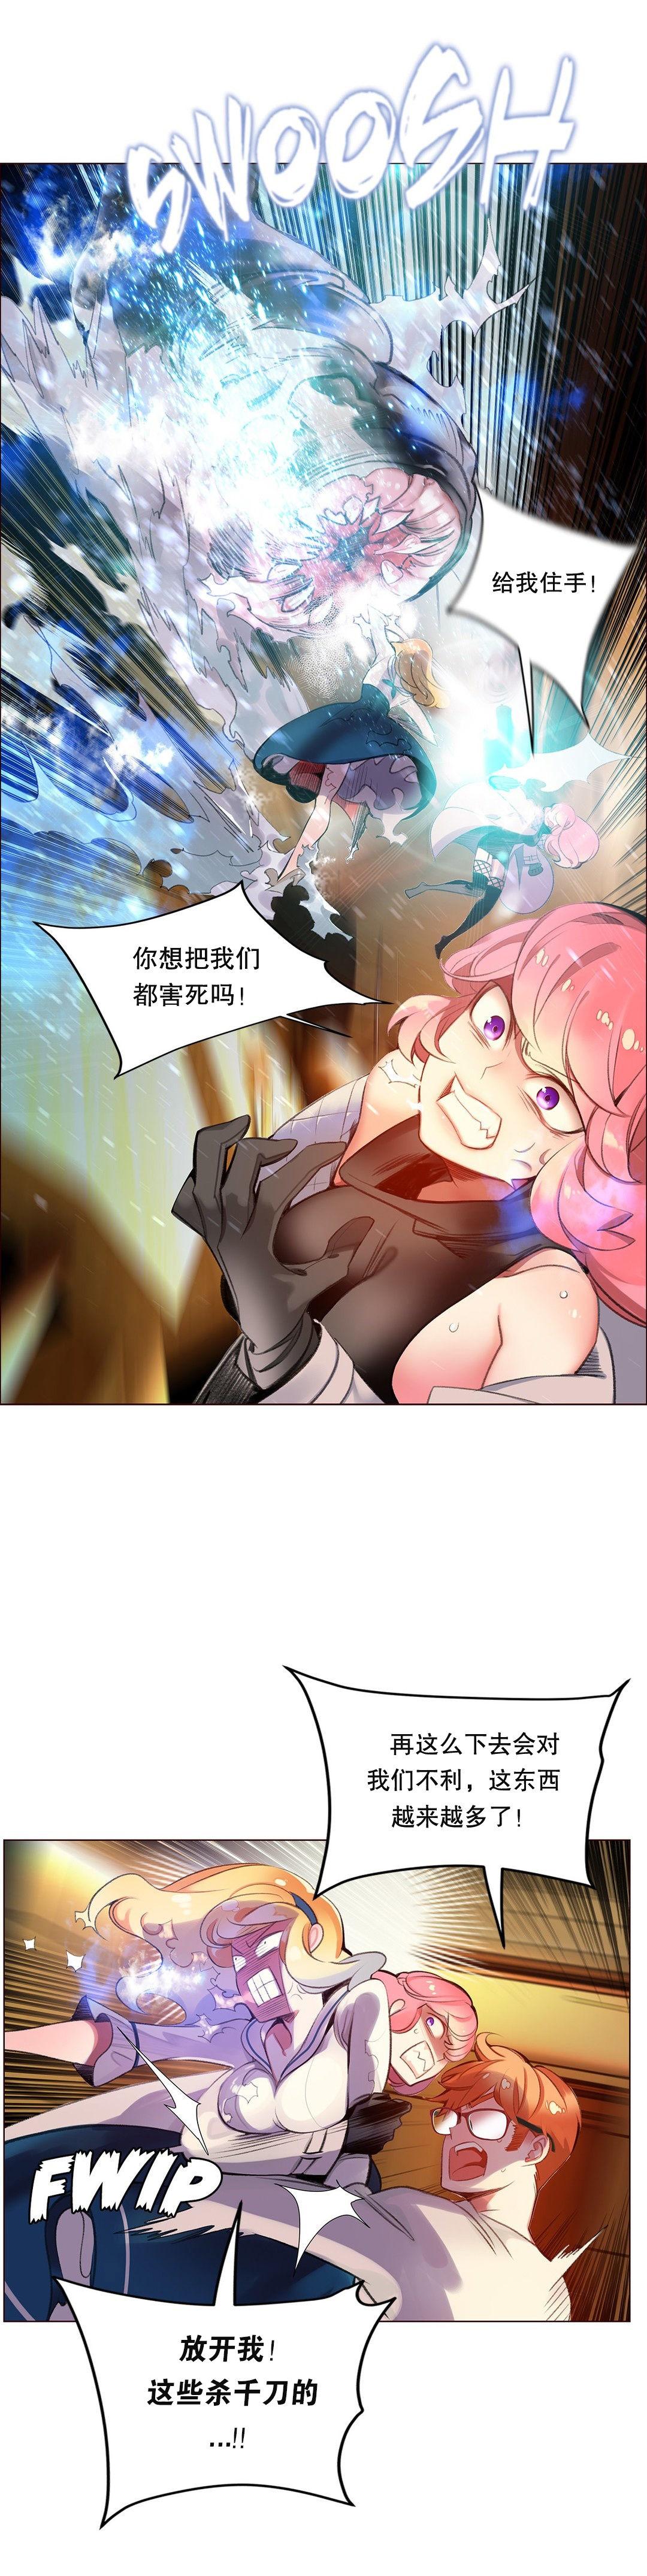 [Juder] Lilith`s Cord (第二季) Ch.61-67 [Chinese] [aaatwist个人汉化] [Ongoing] 164